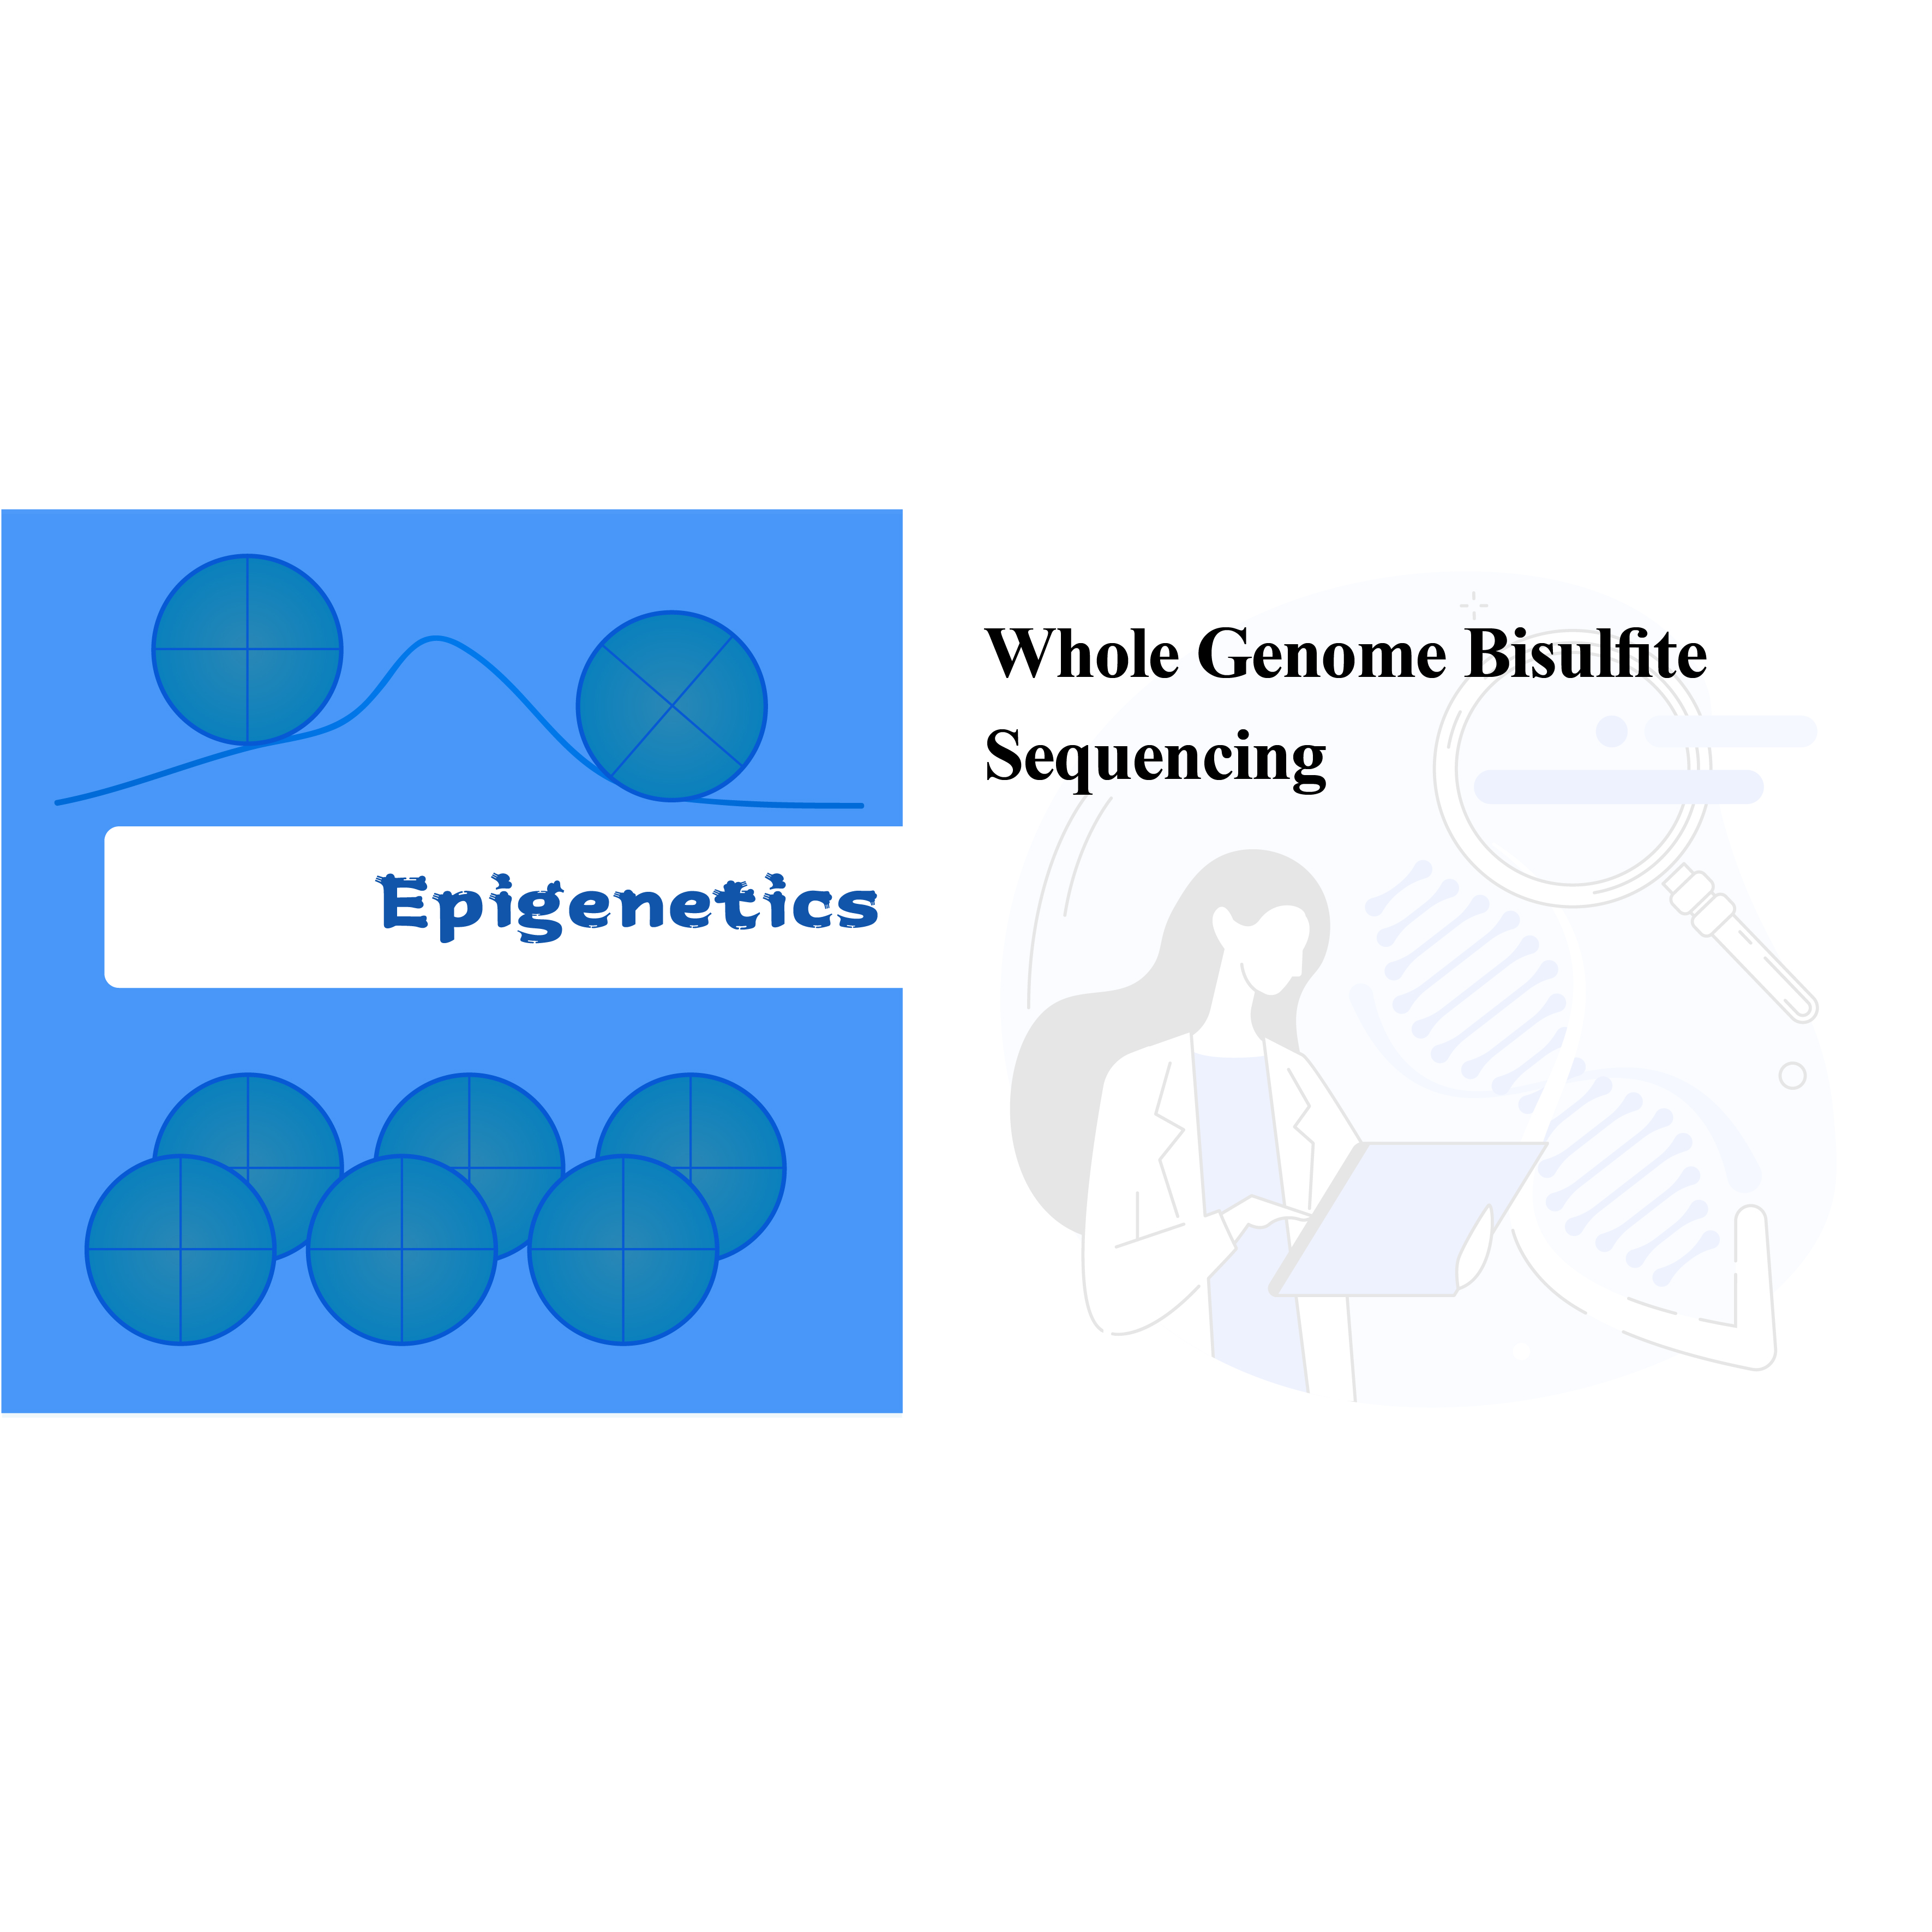 Whole genome bisulﬁte sequencing(WGBS)